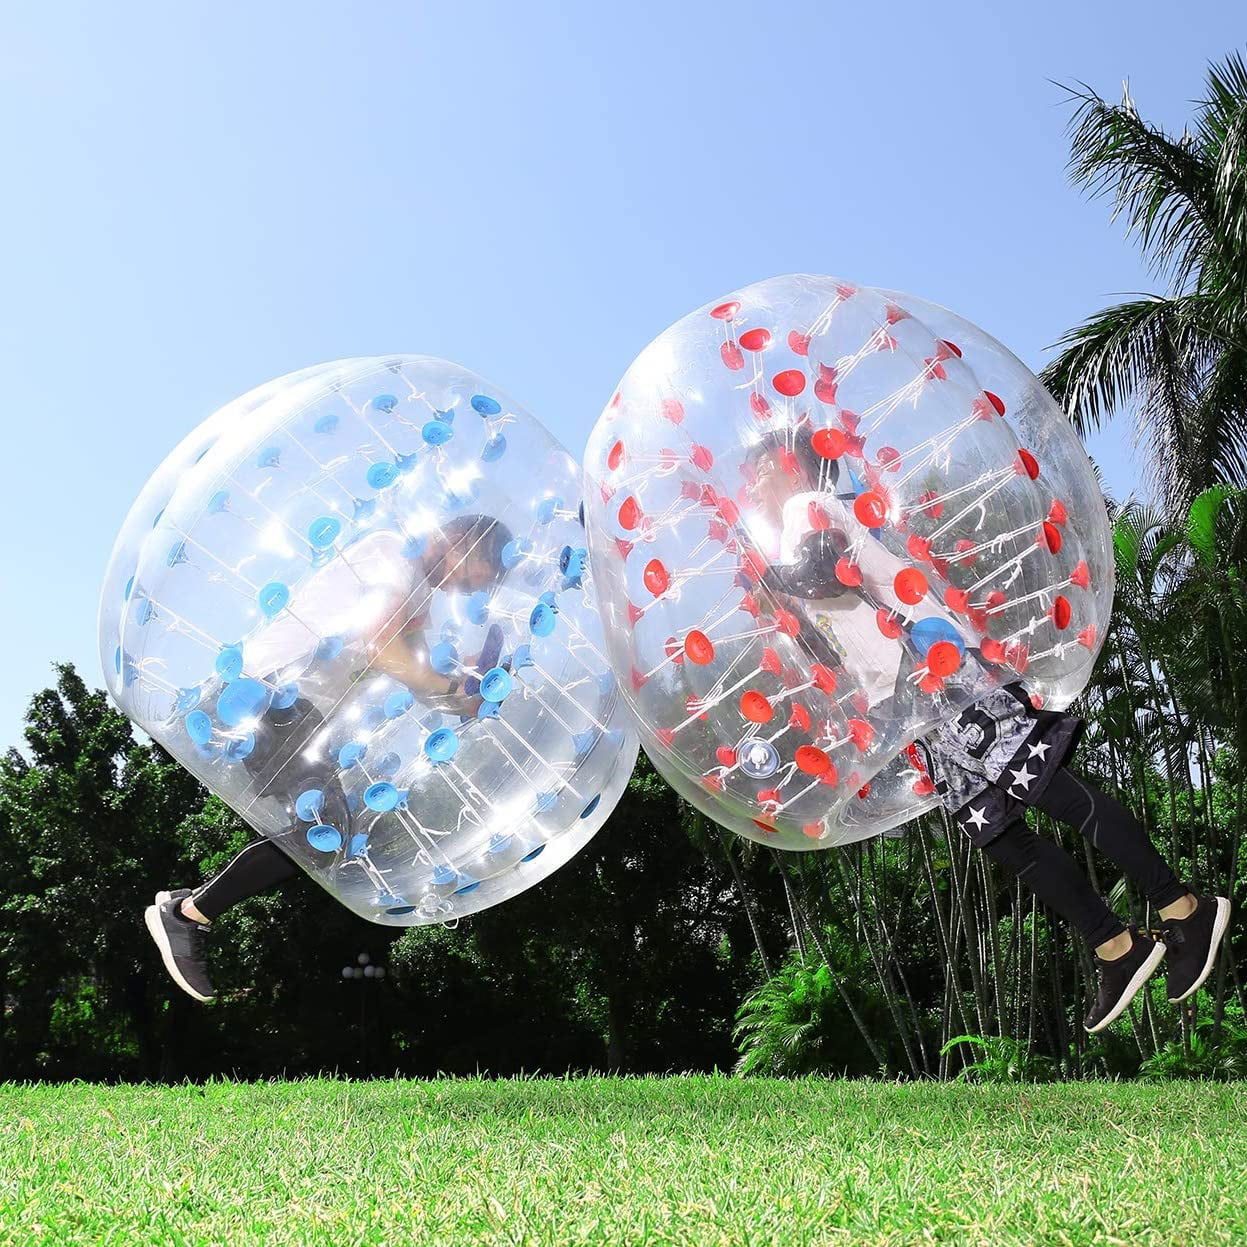 soarflight Kids Body Bubble Ball 2 Pack Inflatable Bumper Balls for Boys Girls Children Outdoor Sensory Activity Toys Wearable Bumper Ball Red and Blue Gorgeous 